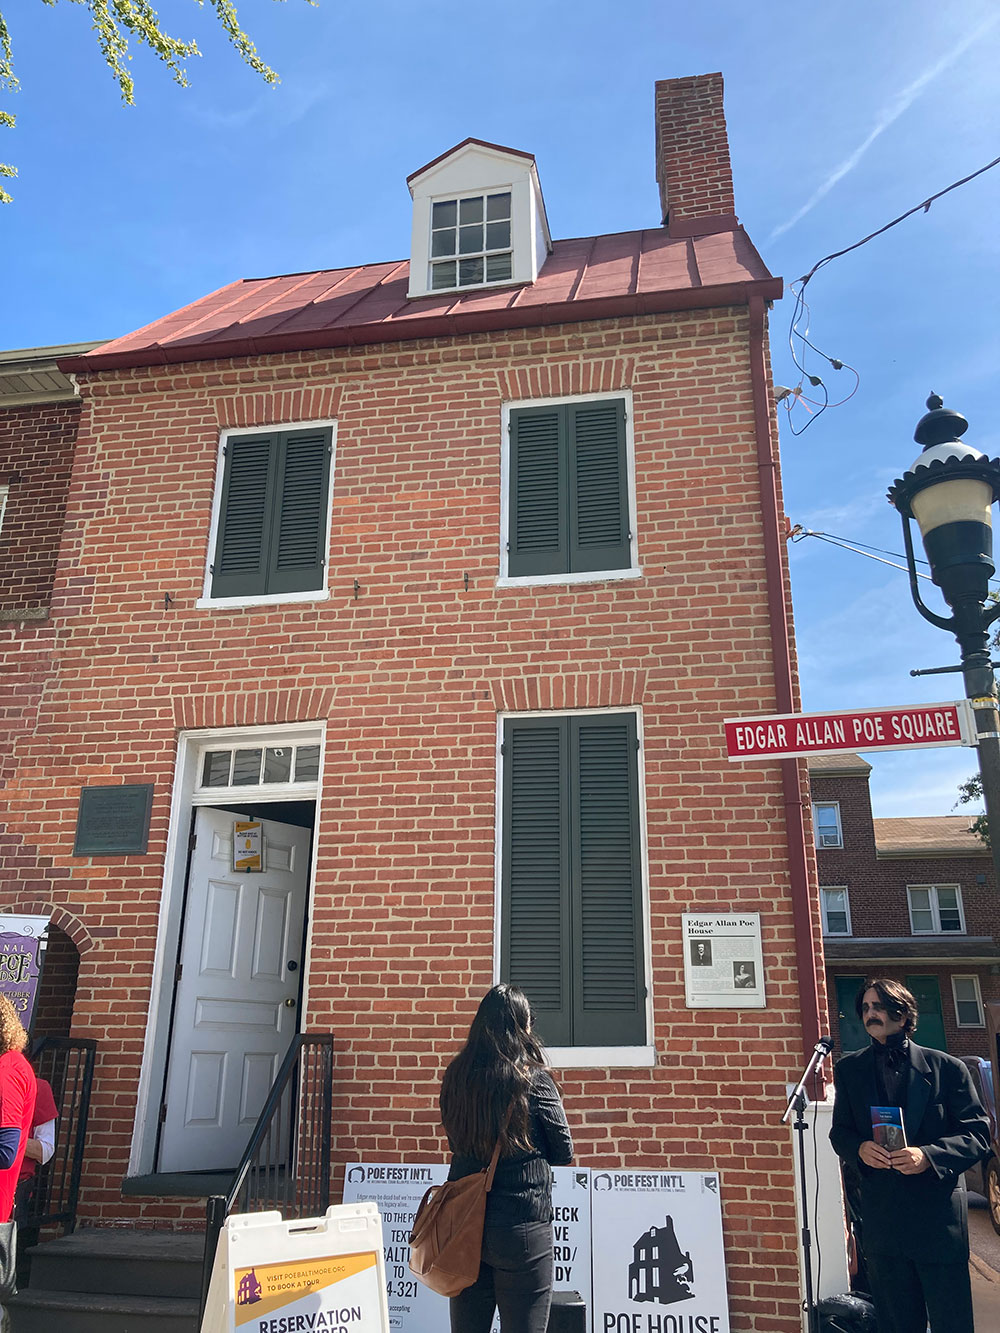 Things to Do in Baltimore: The Edgar Allan Poe House